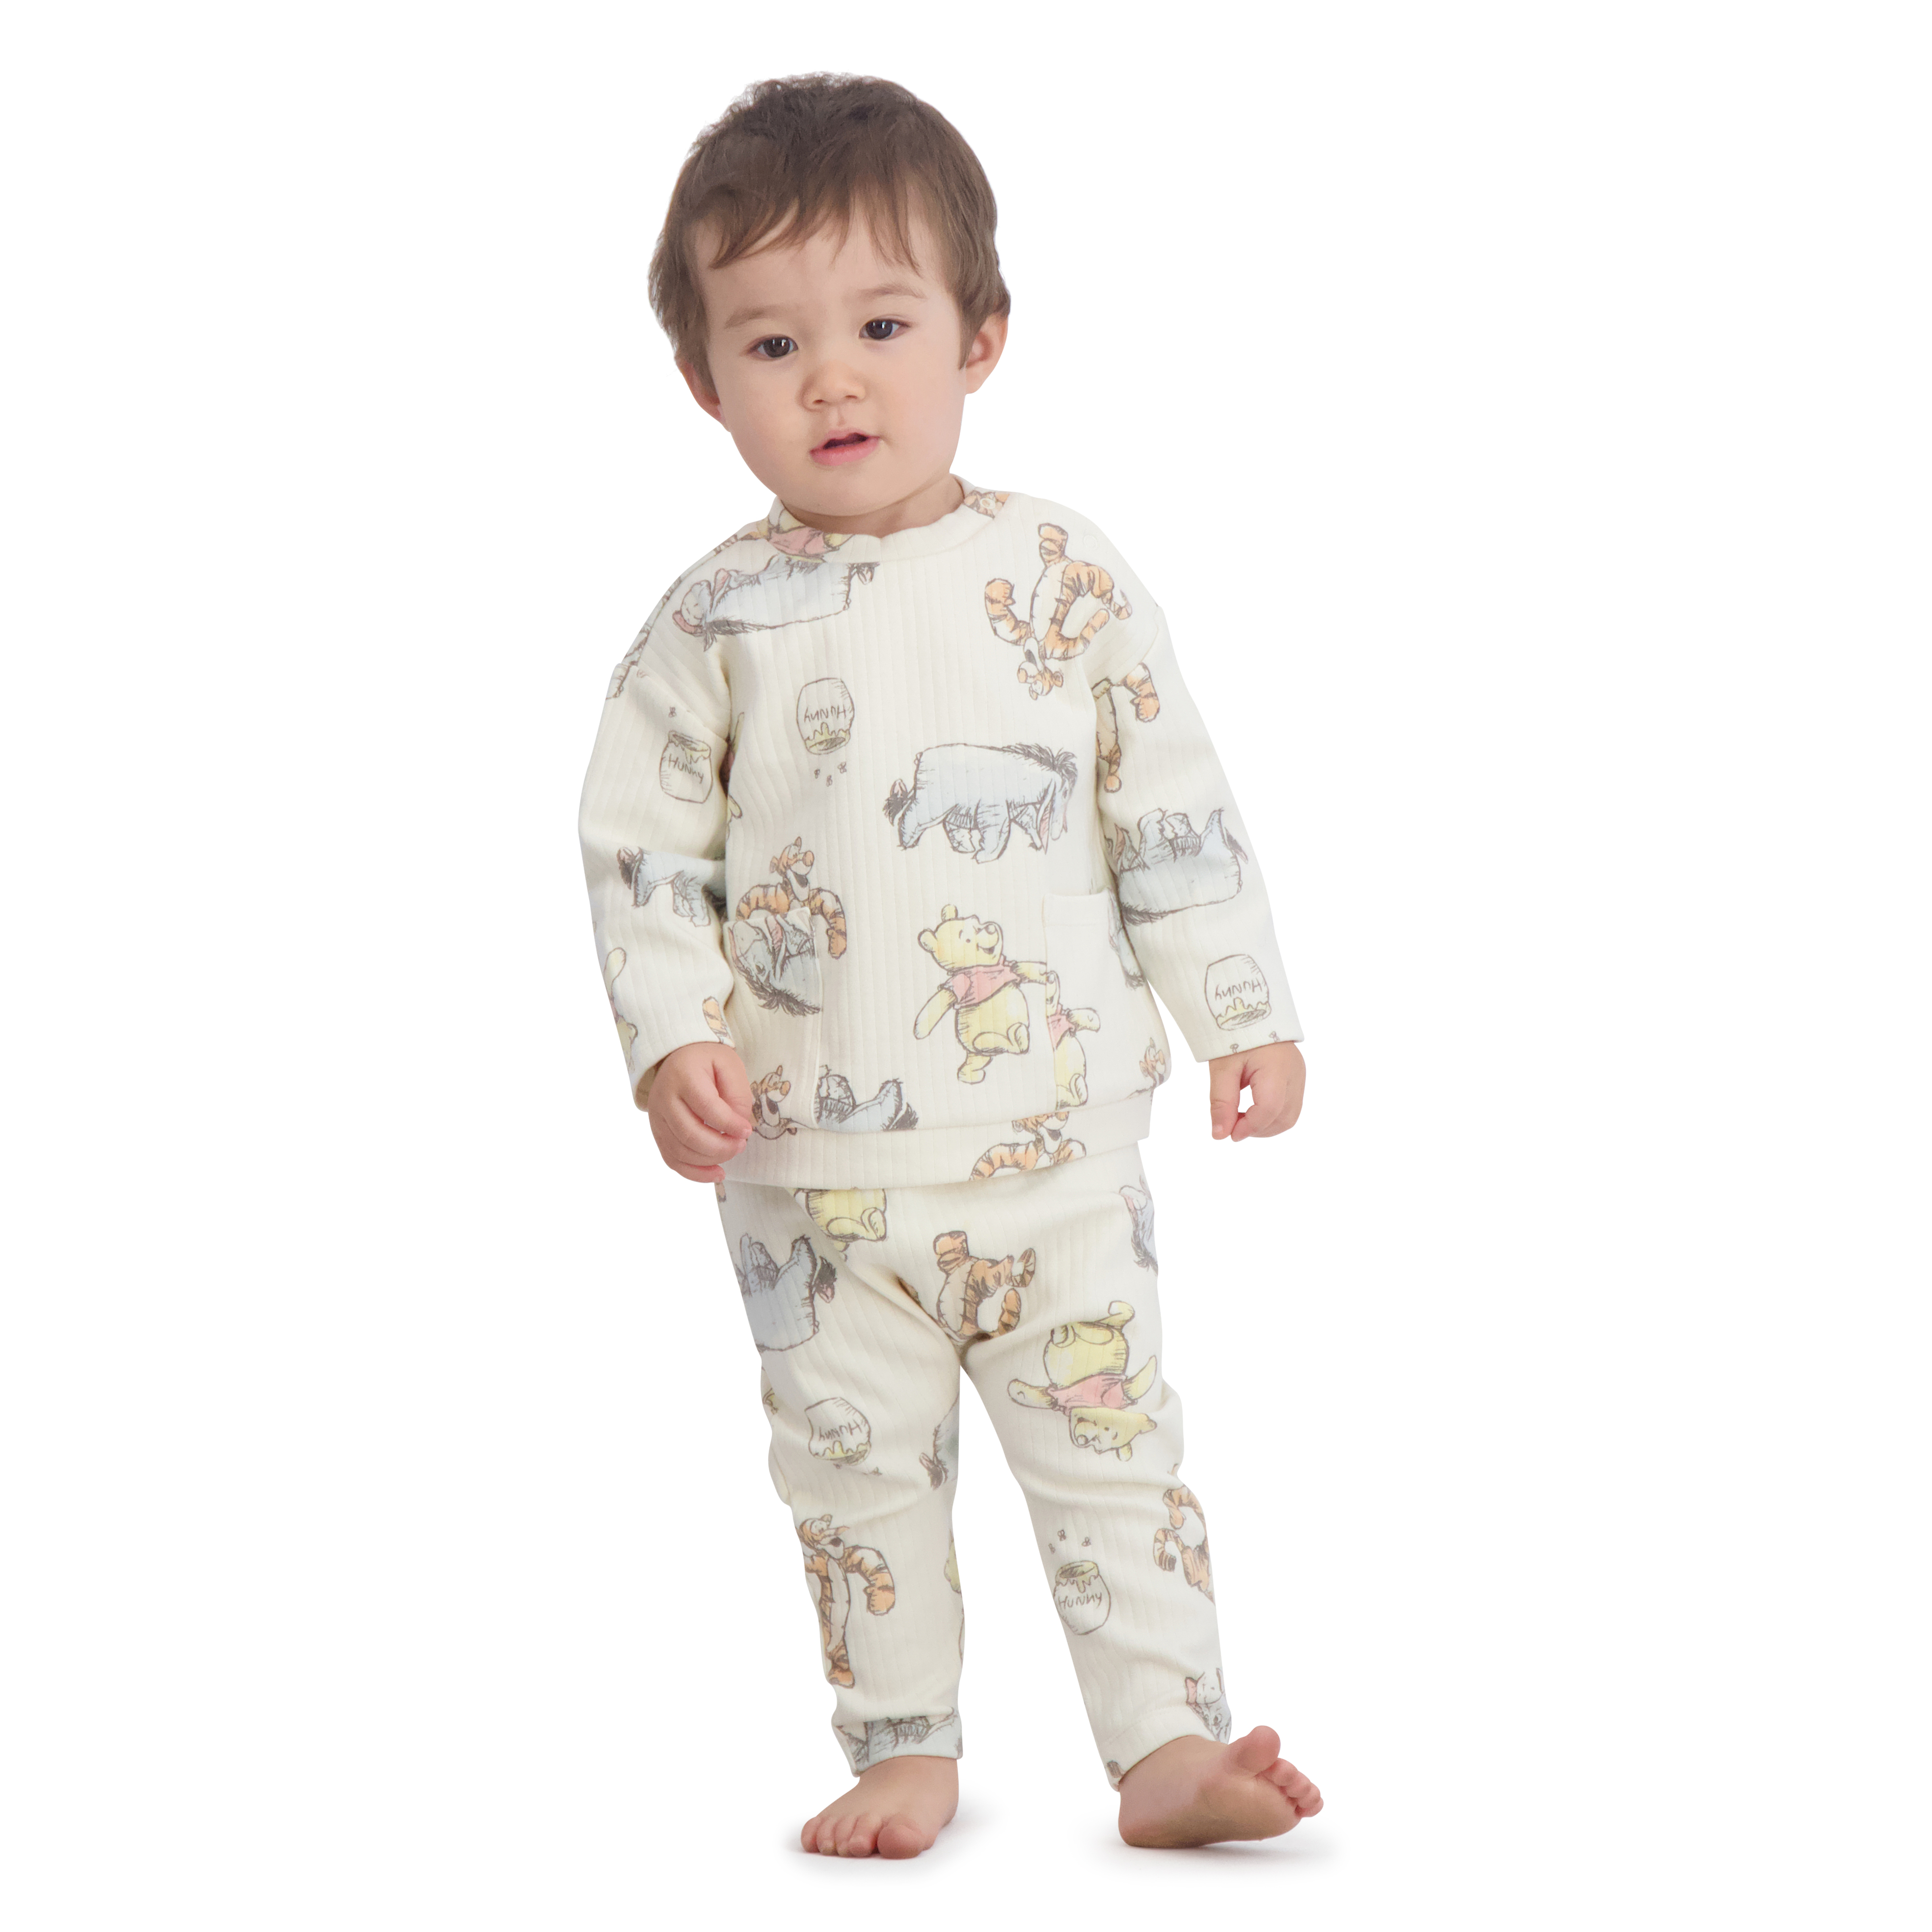 Winnie the Pooh Baby Boy 2 Piece Pant Set, Sizes 0/3 Months-24 Months - image 1 of 8